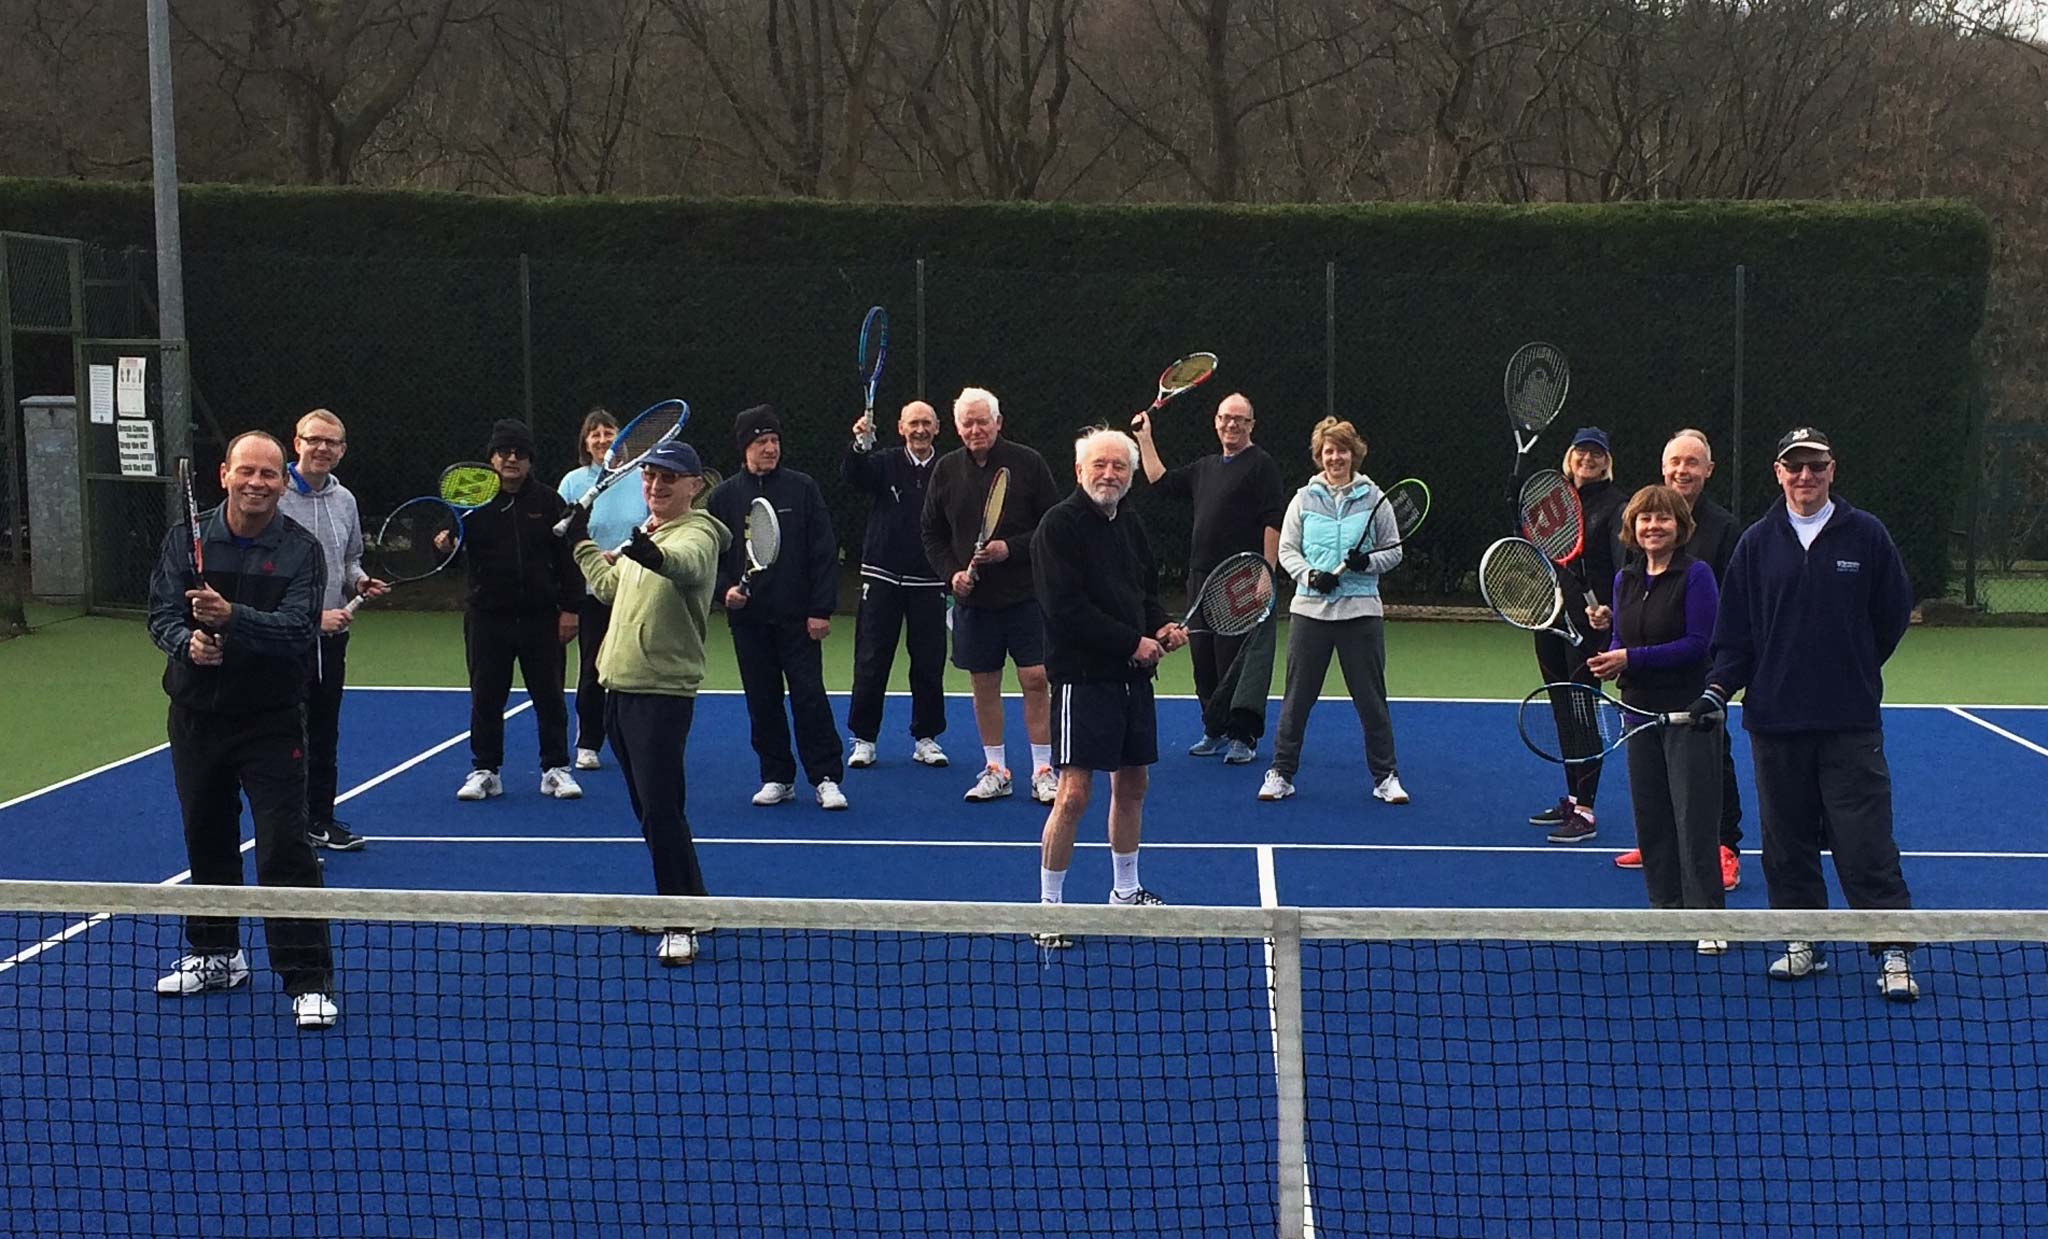 Tennis for Over 50s Senior Tennis at Priory Tennis Club